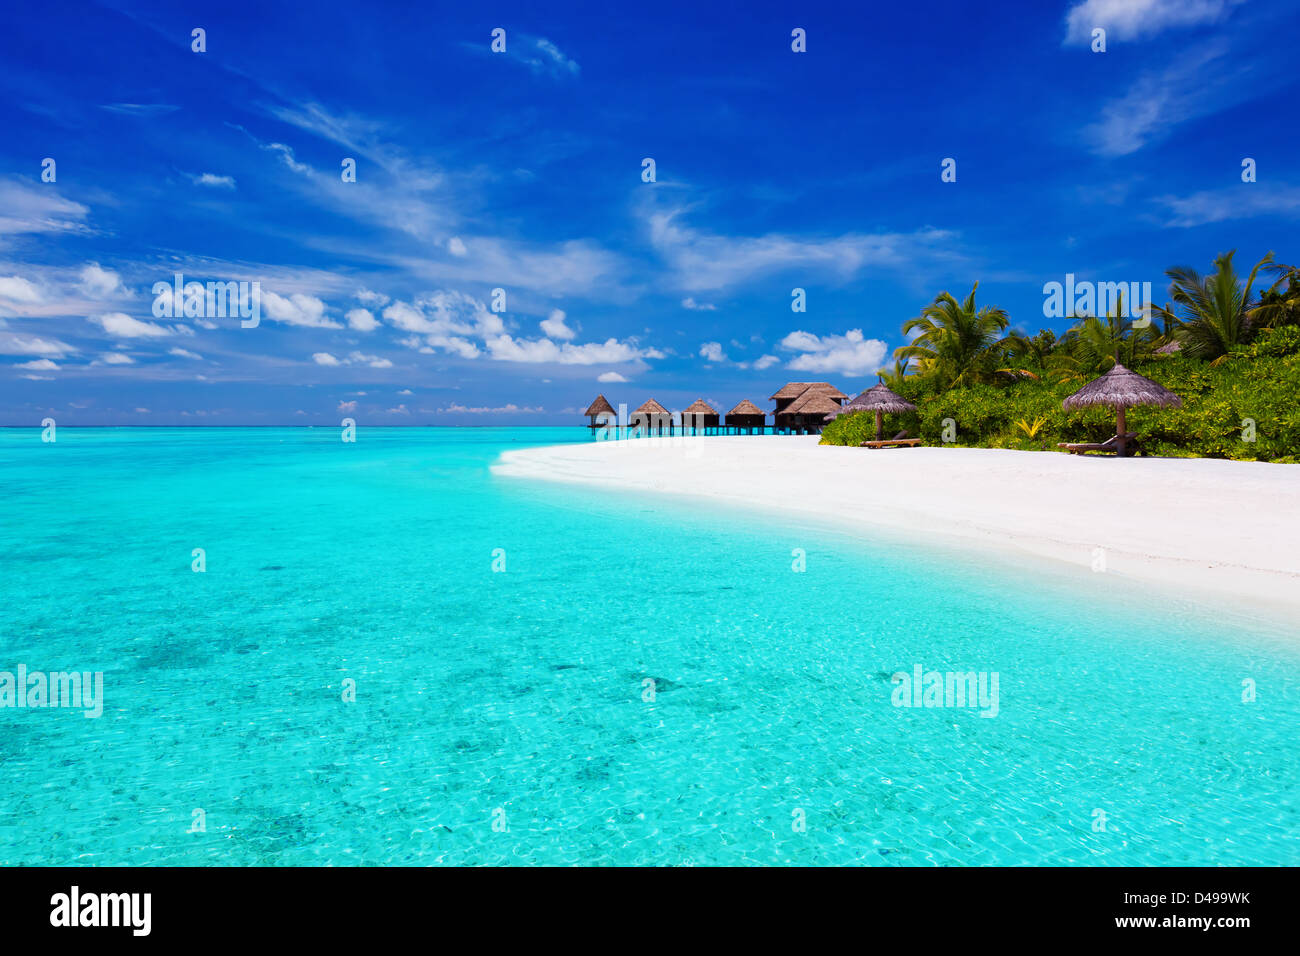 Tropical island with palm trees and villas over turquoise lagoon Stock Photo